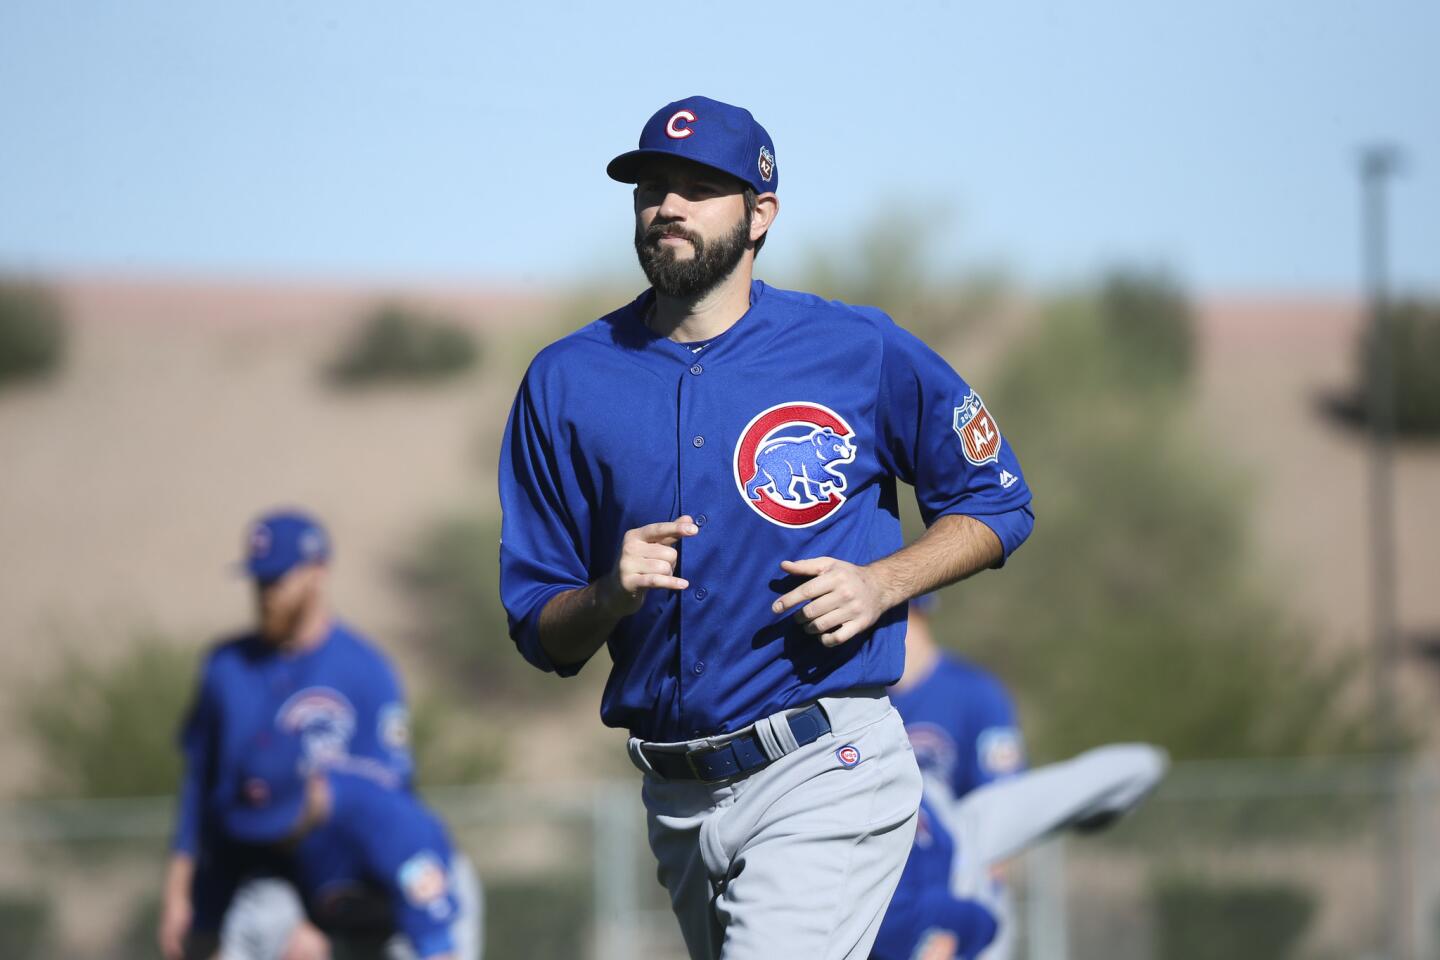 Jason Hammel warms up with other players during spring training, Feb. 25, 2016.